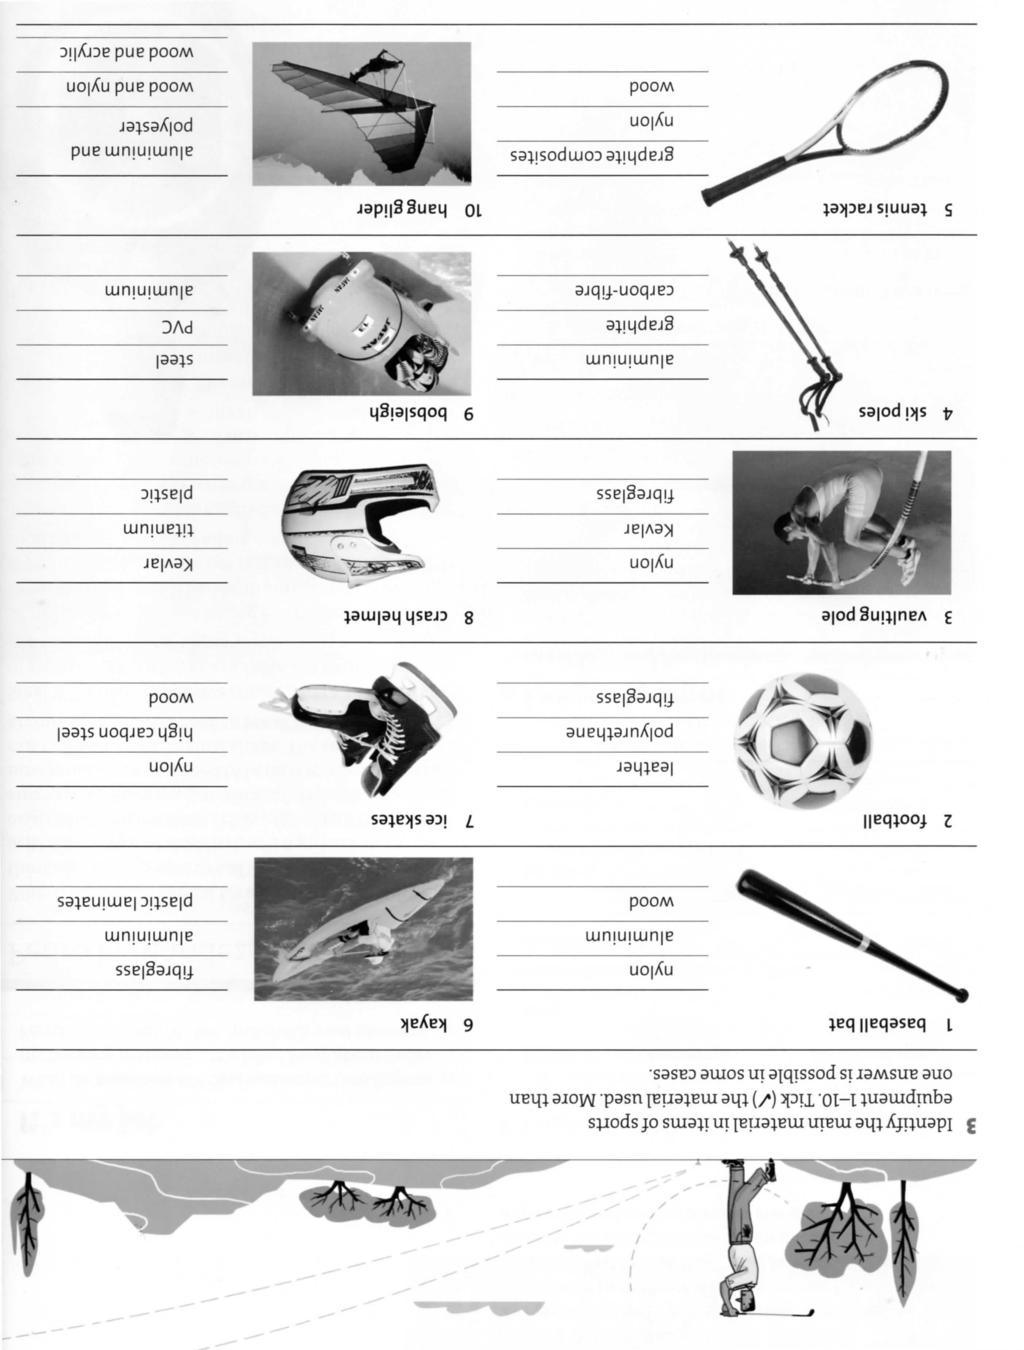 3 Identify the main material in items of sports equipment 1-10. Tick (/) the material used. More than one answer is possible in some cases.